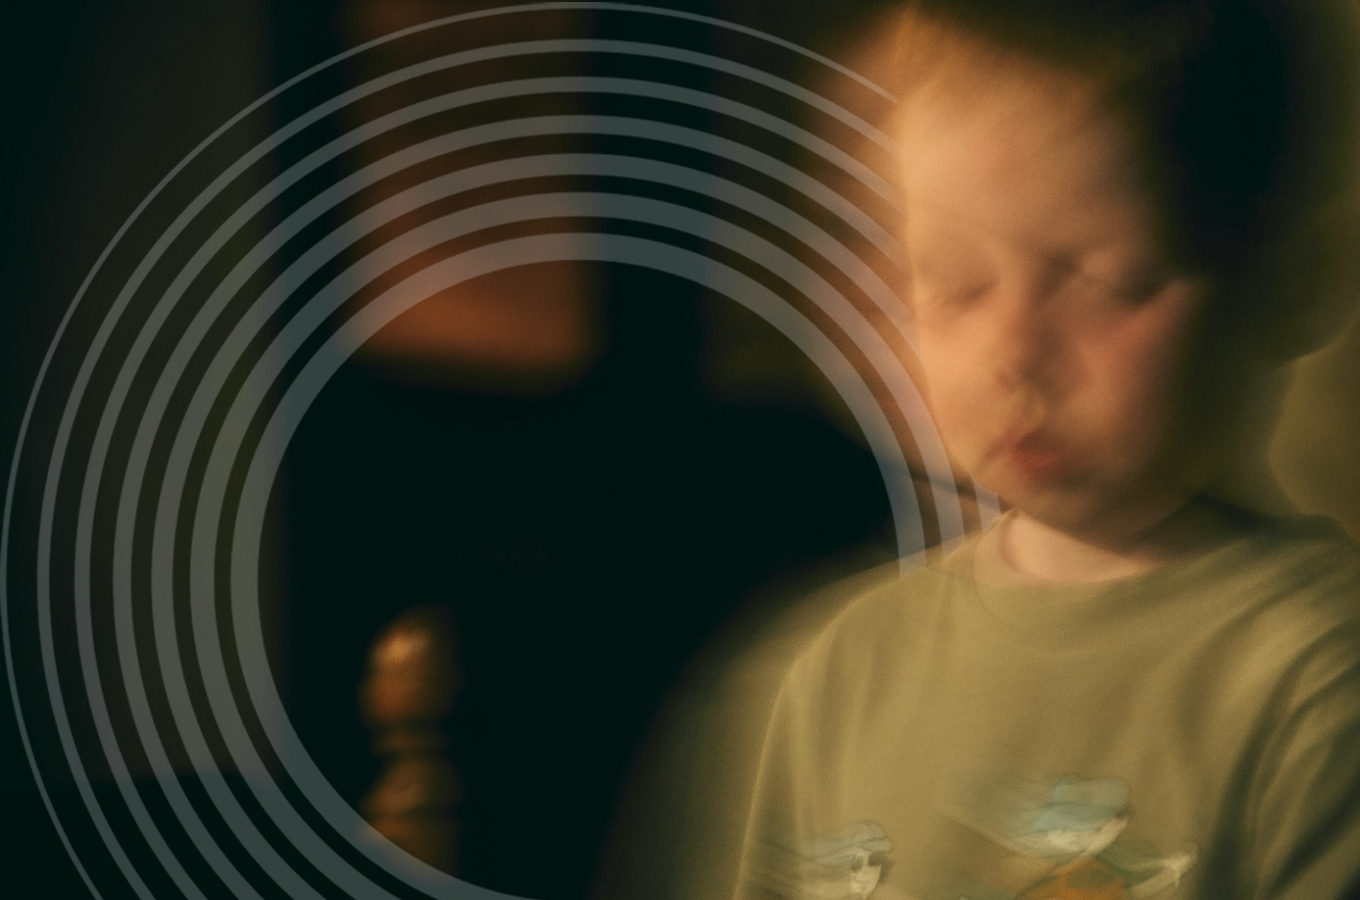 A toddler boy looks down with a serious expression. The image is subtly blurred and shaky.